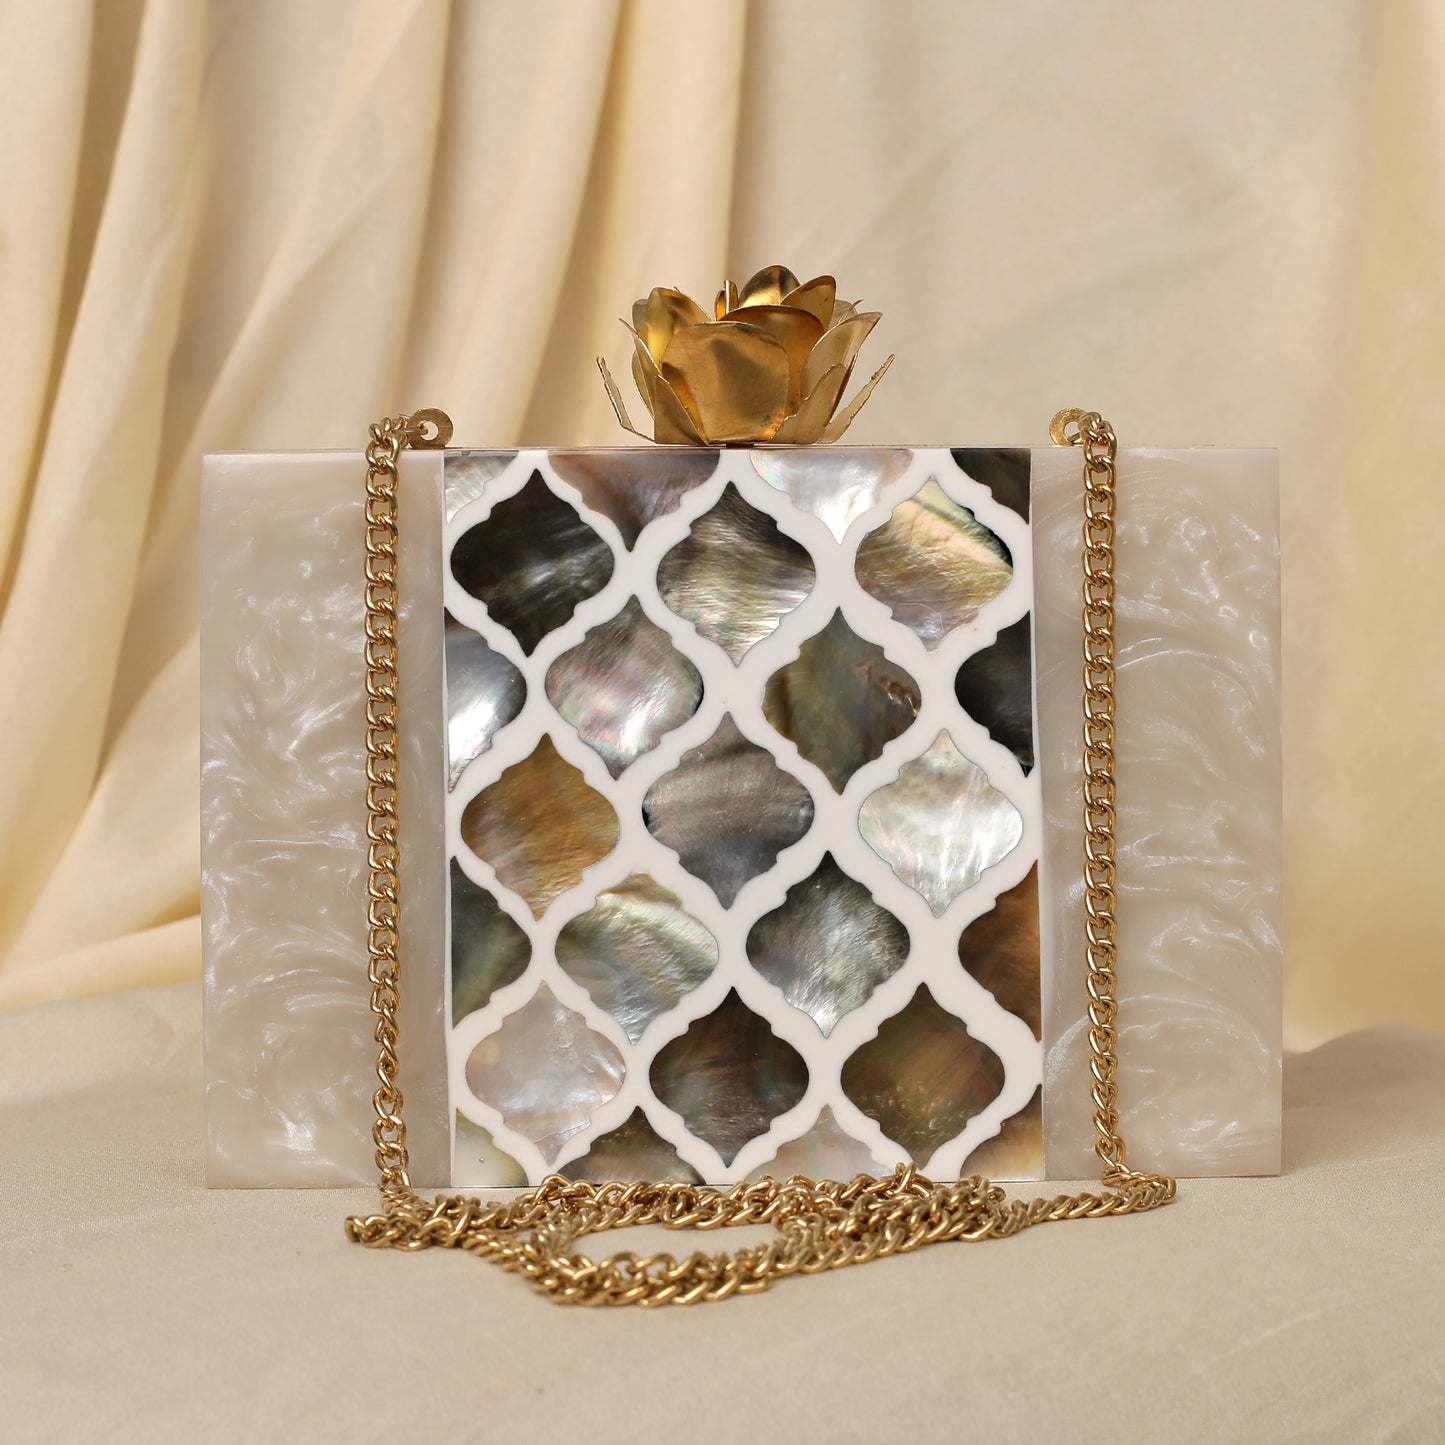 The Royal Marble Look Clutch